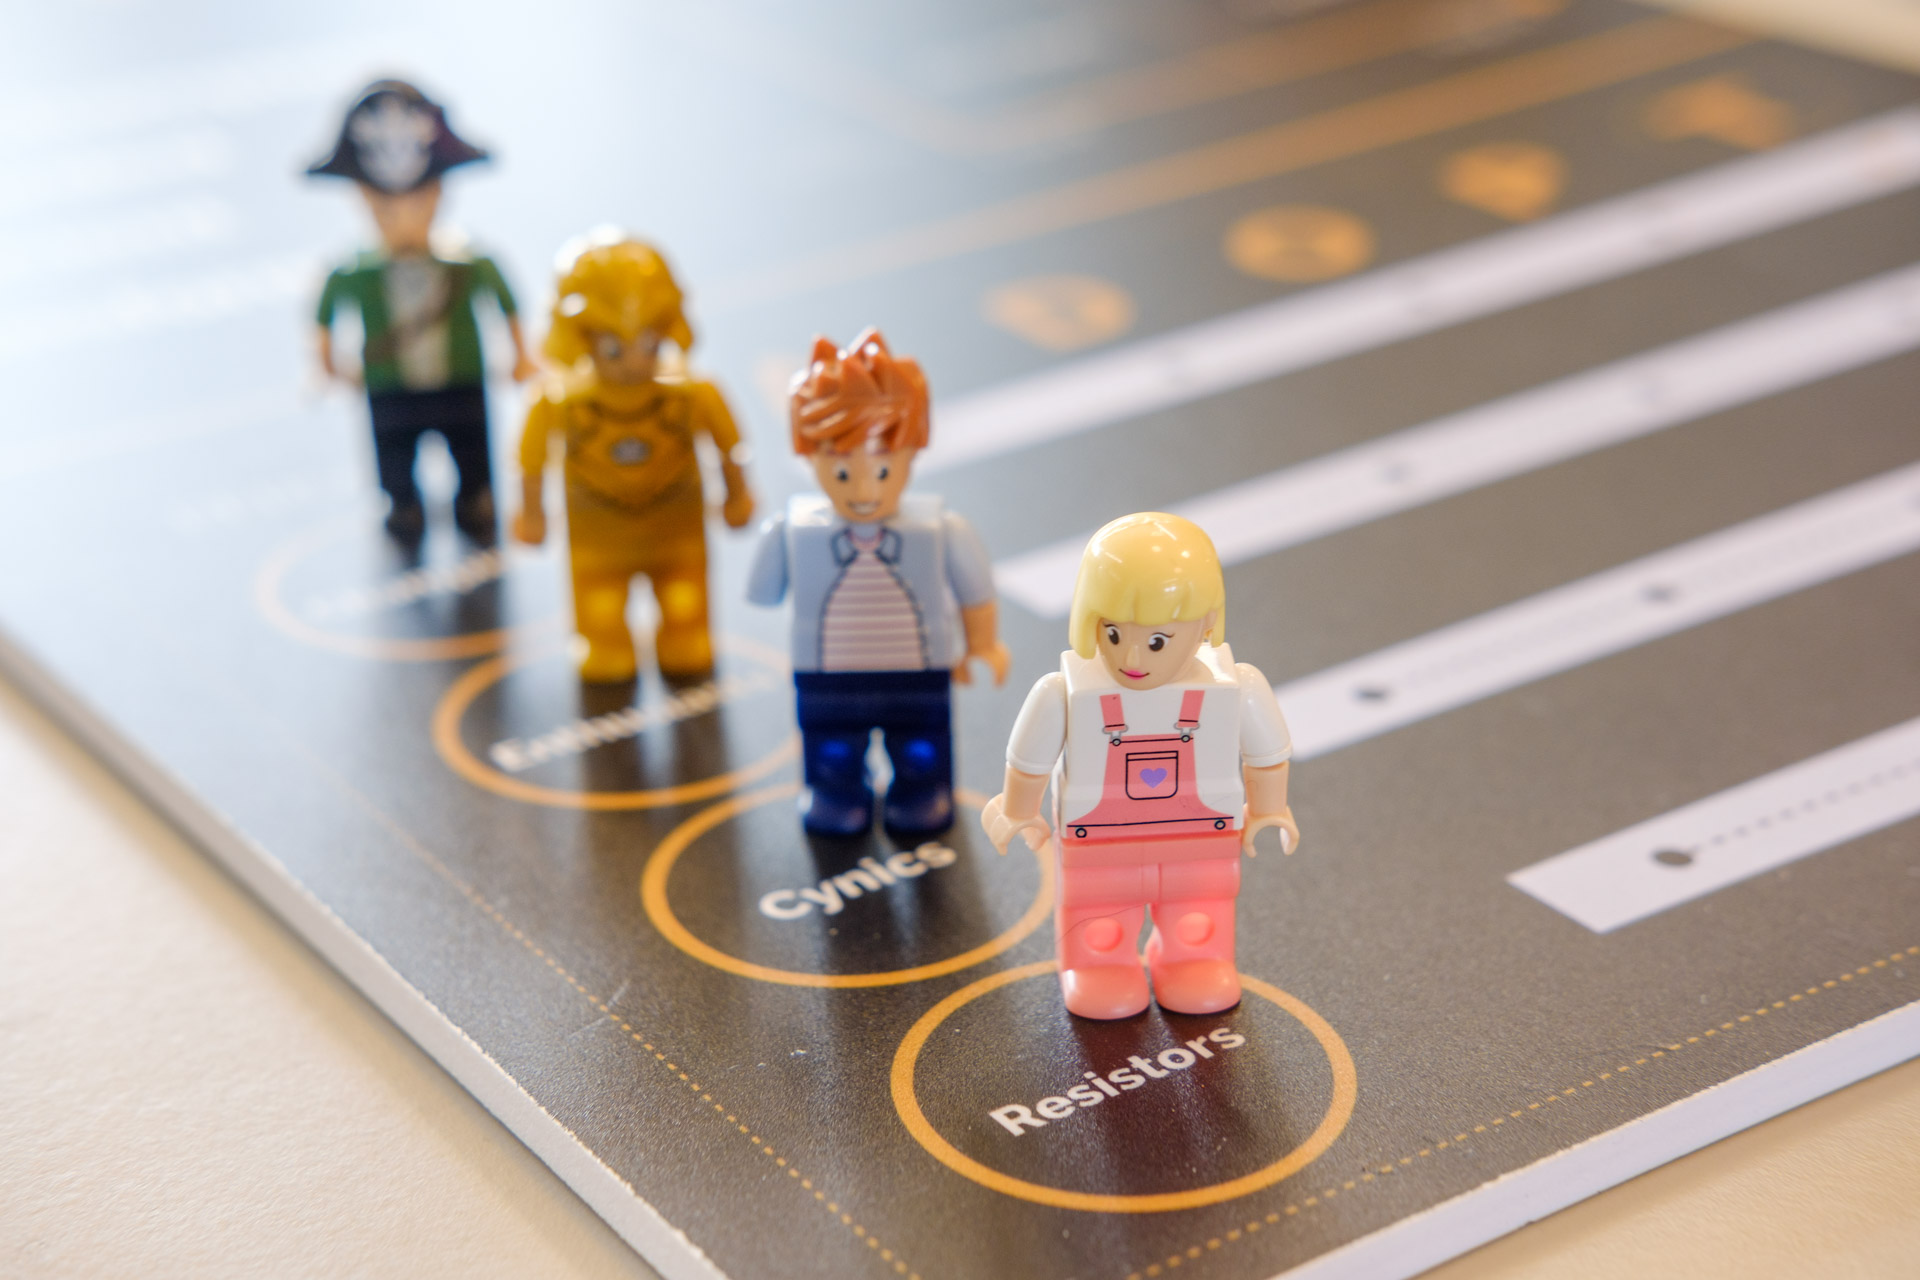 Miniature Lego action figures stood on board game